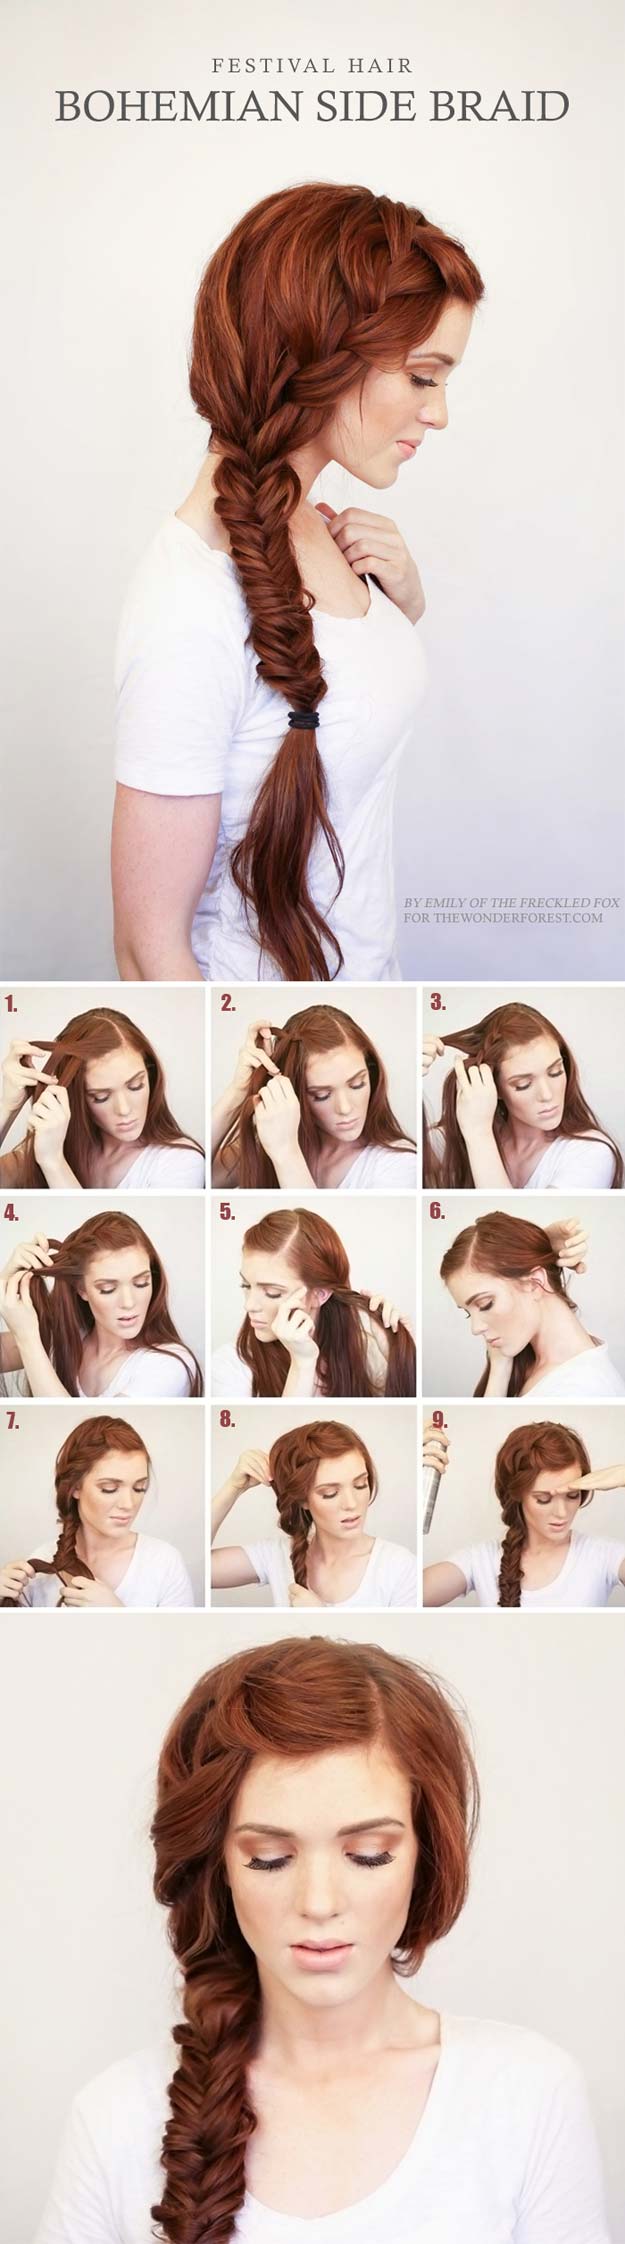 Best Hair Braiding Tutorials - Bohemian Side Braid Festival Hair Tutorial - Easy Step by Step Tutorials for Braids - How To Braid Fishtail, French Braids, Flower Crown, Side Braids, Cornrows, Updos - Cool Braided Hairstyles for Girls, Teens and Women - School, Day and Evening, Boho, Casual and Formal Looks #hairstyles #braiding #braidingtutorials #diyhair 